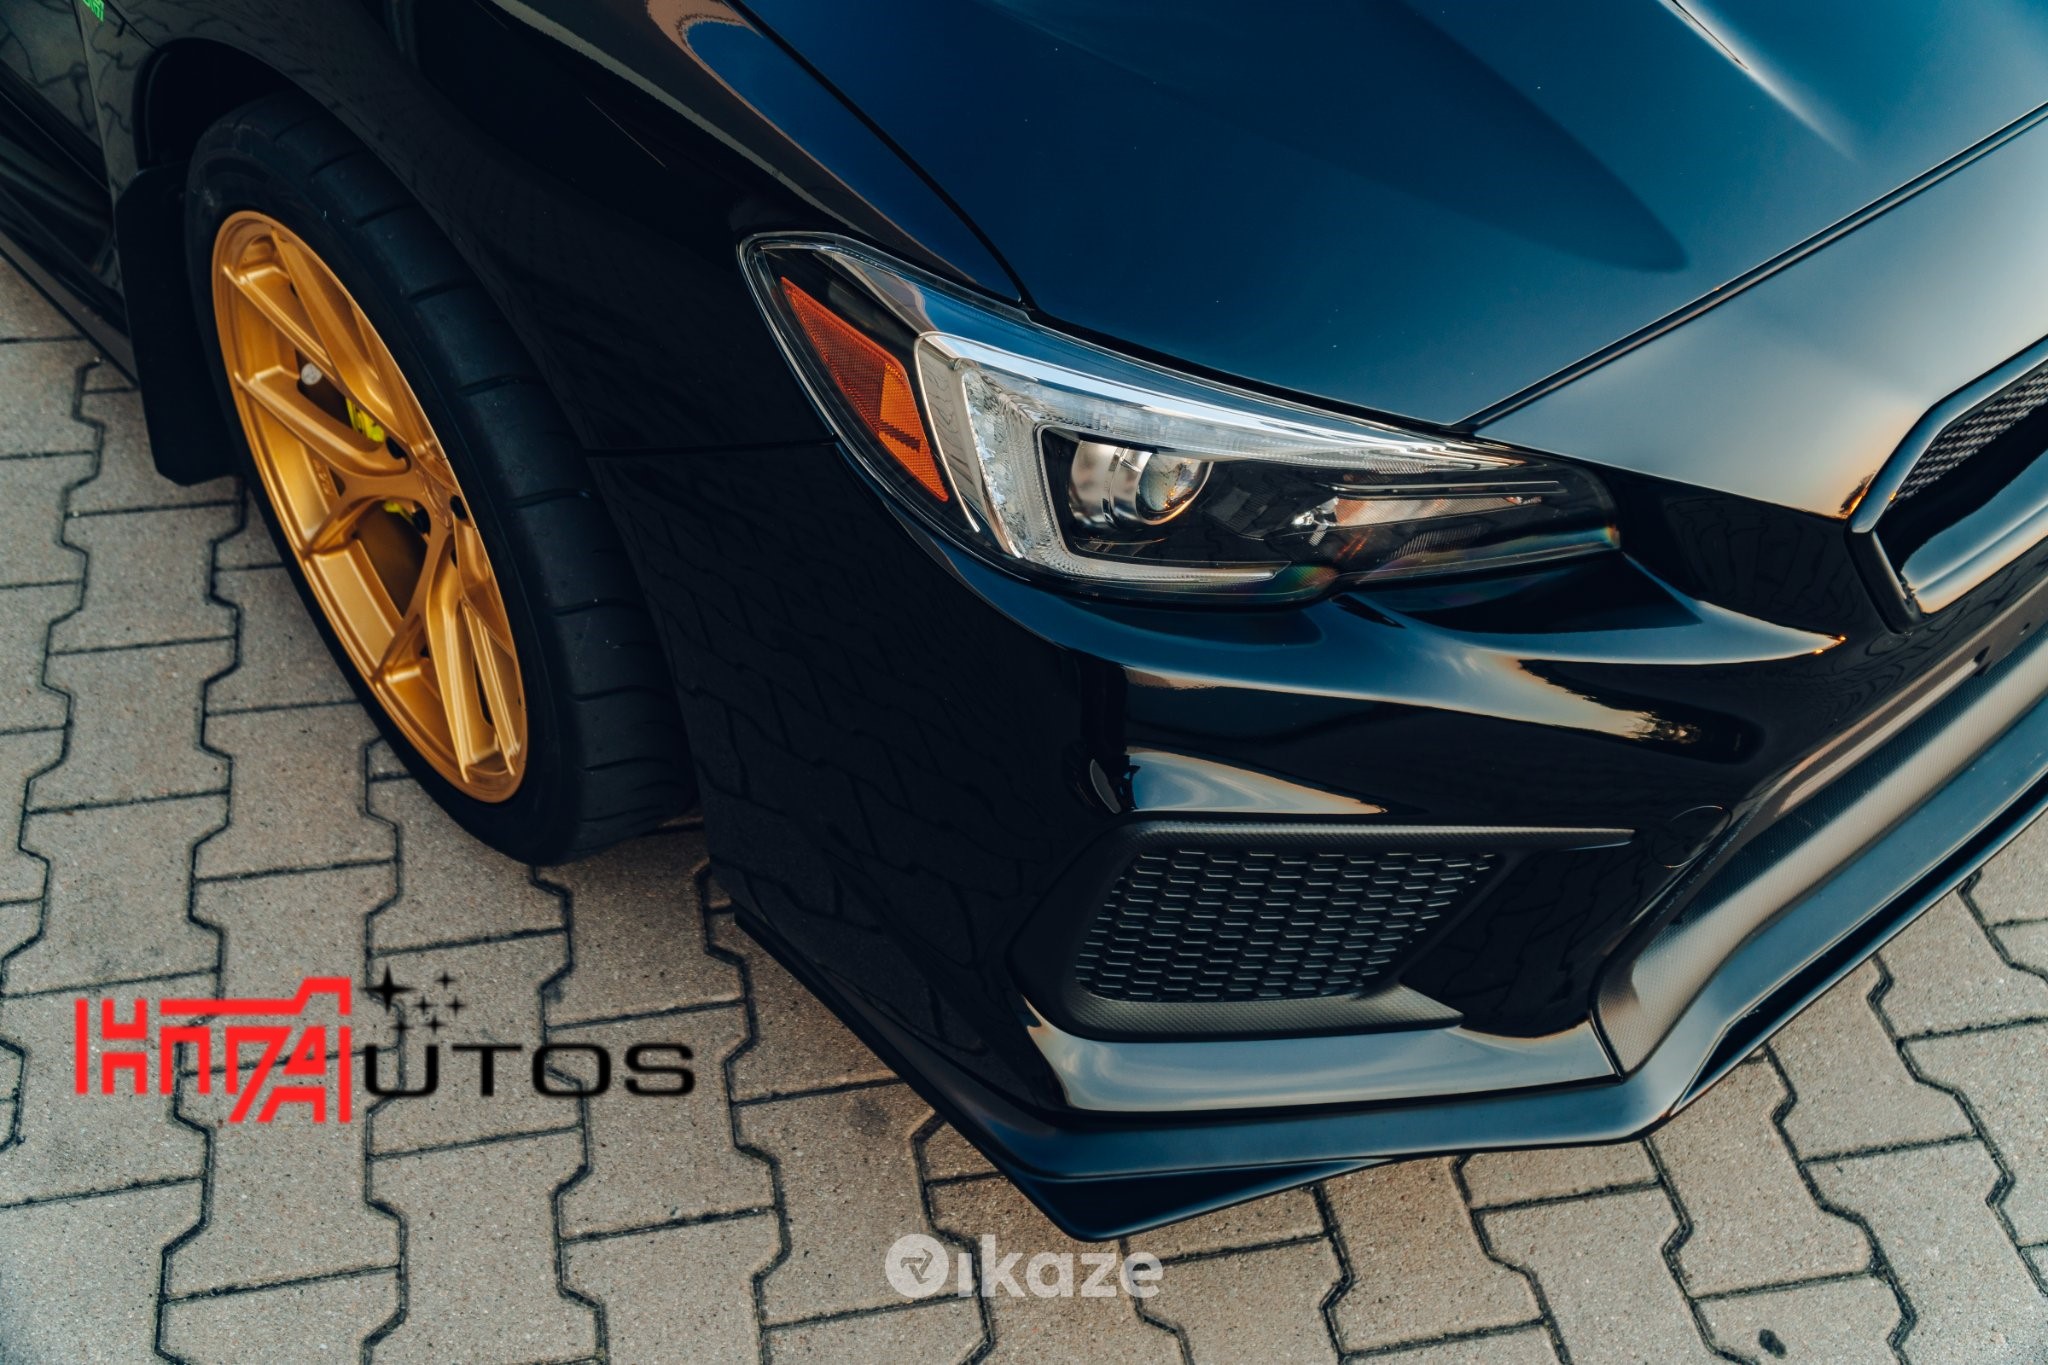 Subaru WRX STi 2015 Styling, Body kits, Diffusers, Side Skirt Extensions, Splitter, Front Lips, Fender Flares, By HT Autos UK. To Fit 2015, 2016, 2017, 2018, 2019, 2020, 2021